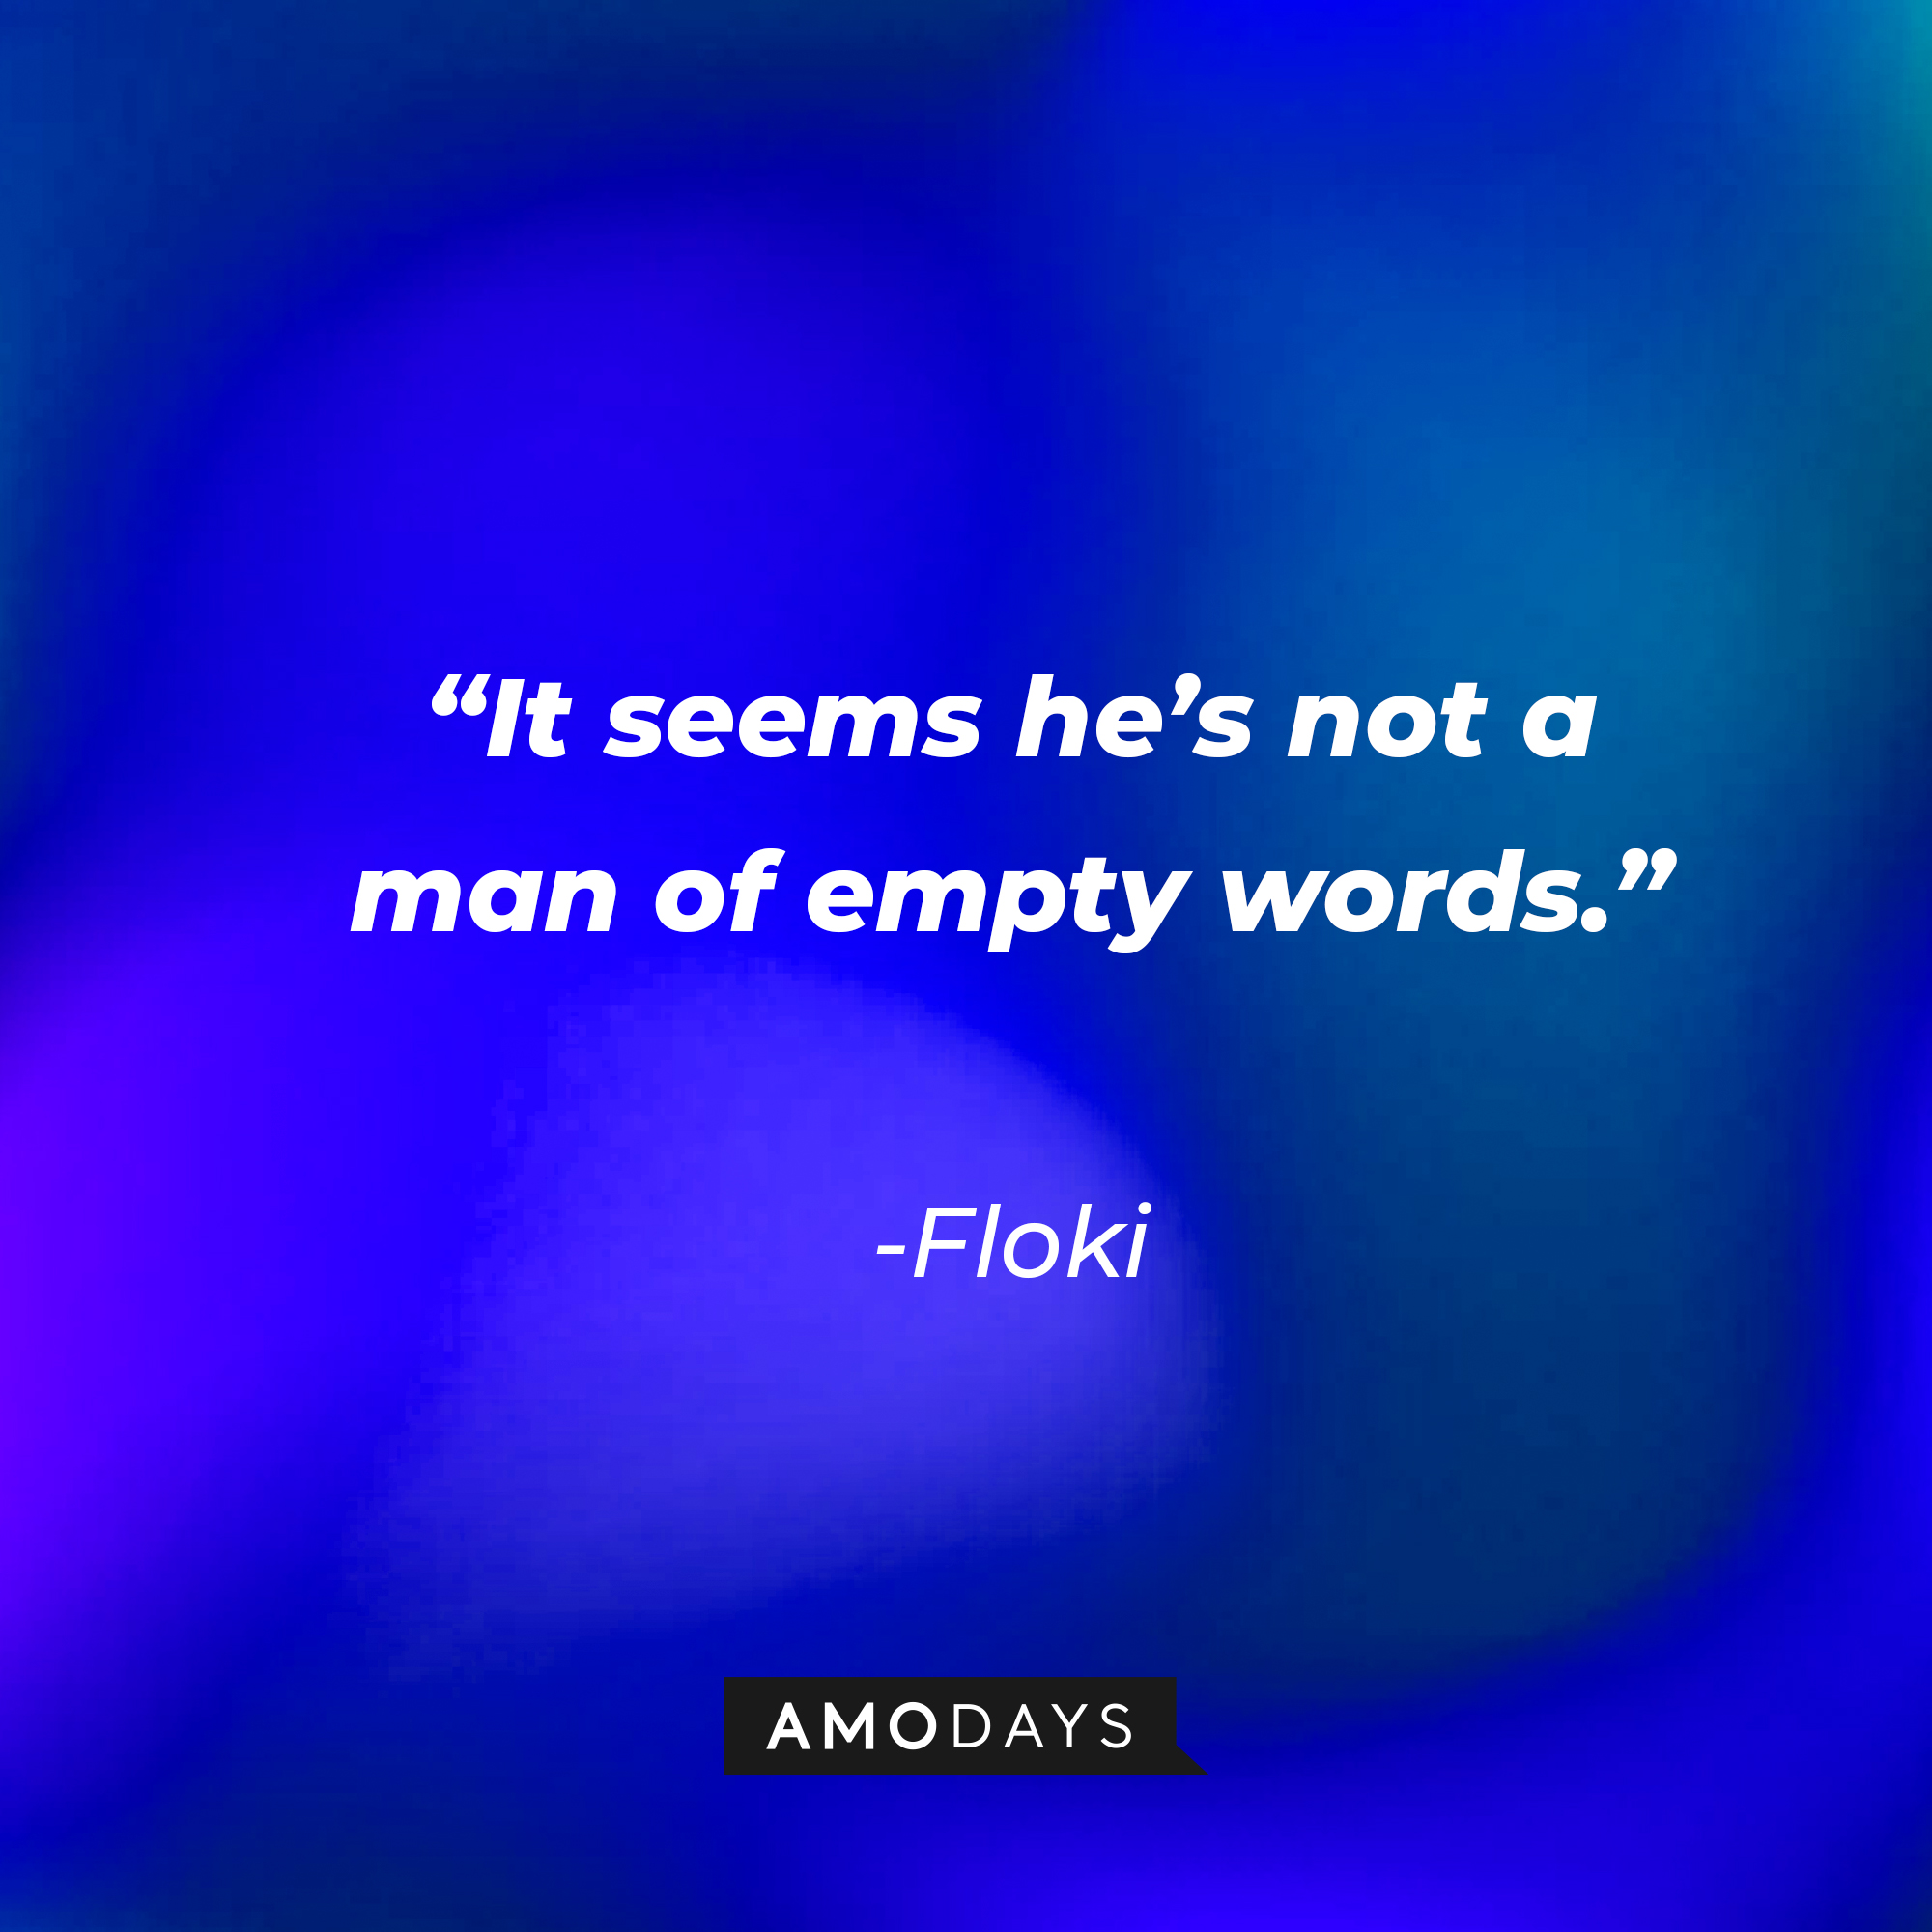 Floki’s quote:“It seems he’s not a man of empty words.” | Source: Amodays